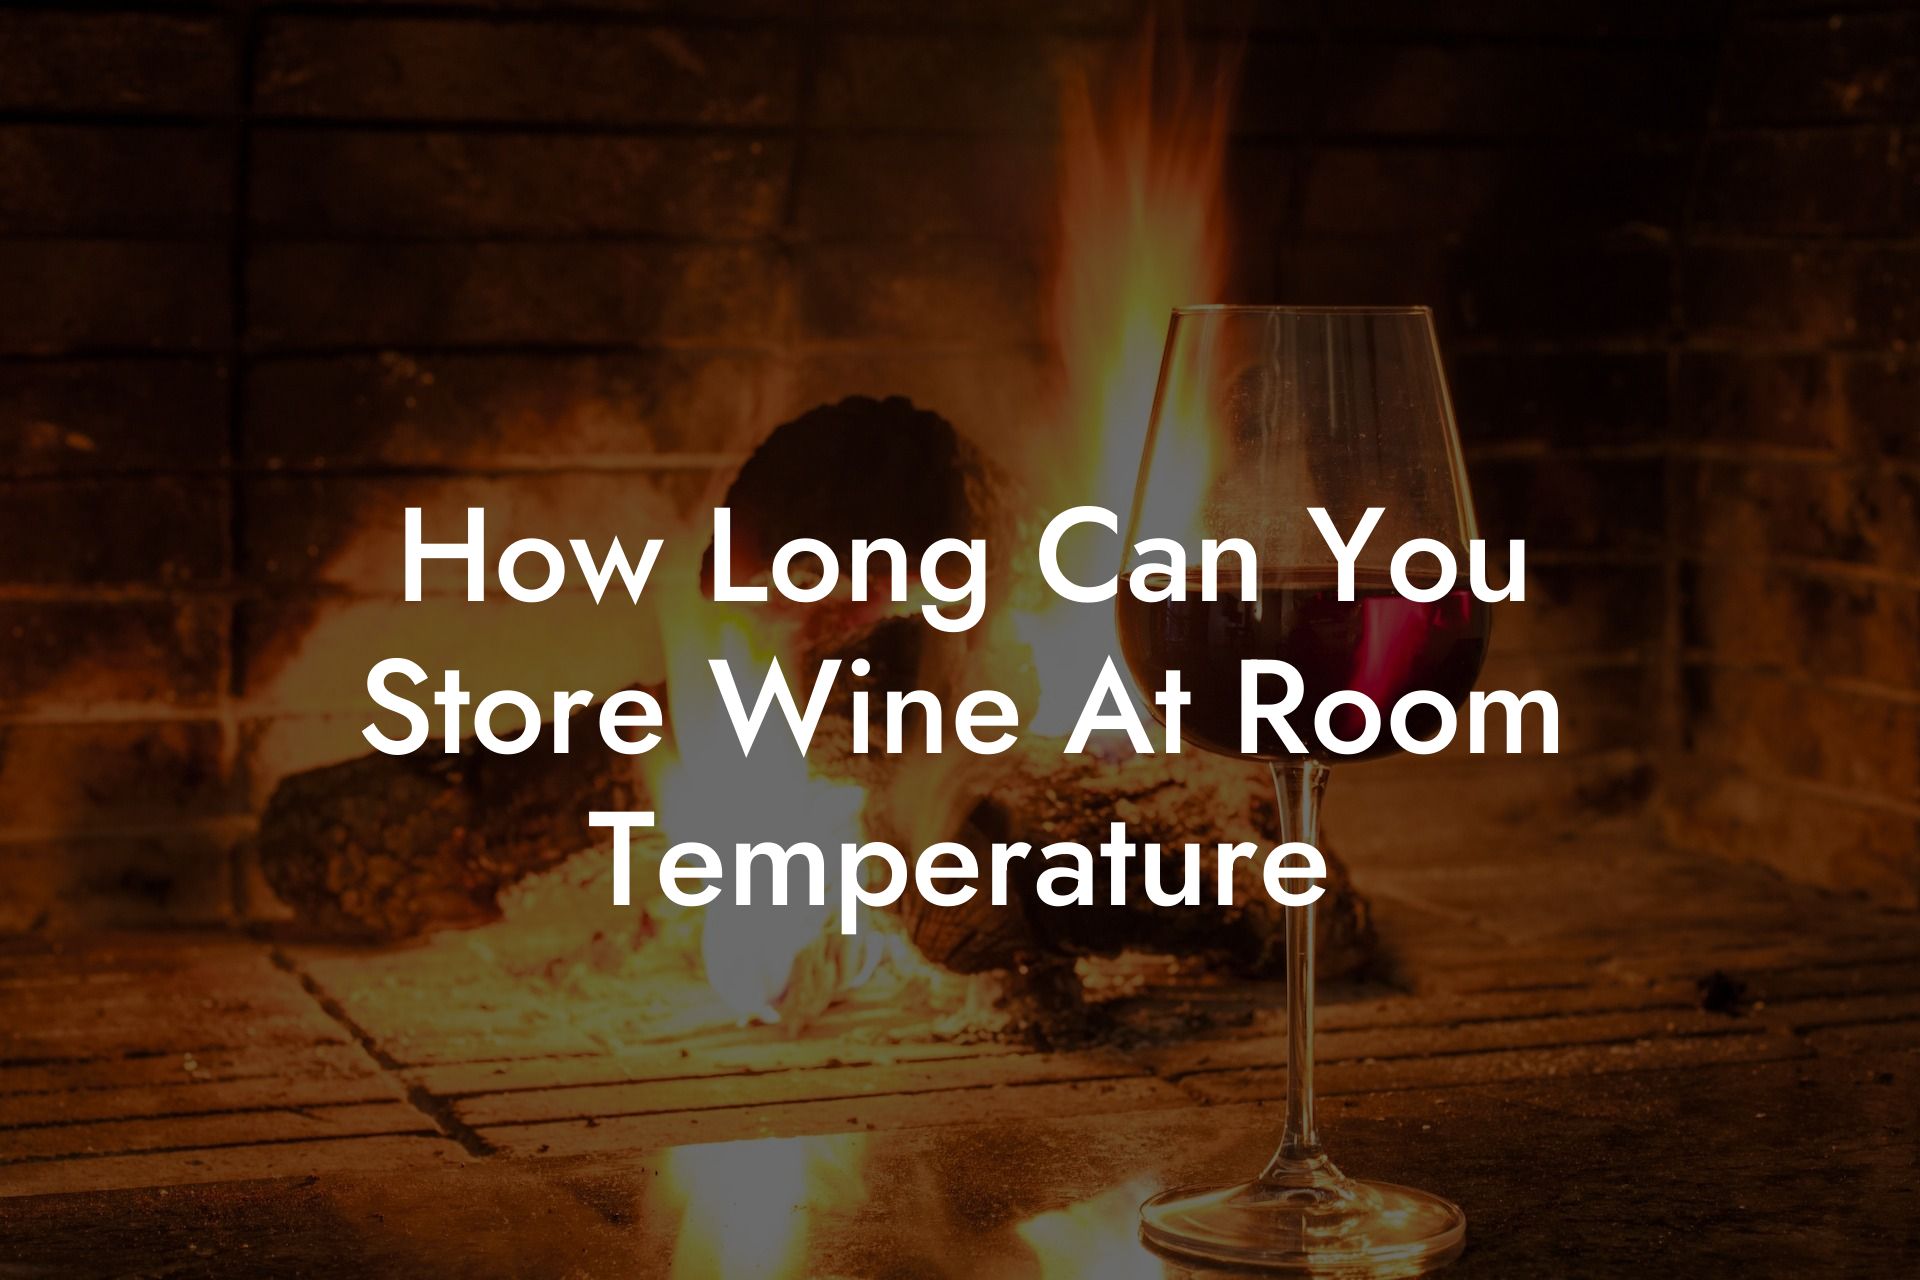 How Long Can You Store Wine At Room Temperature